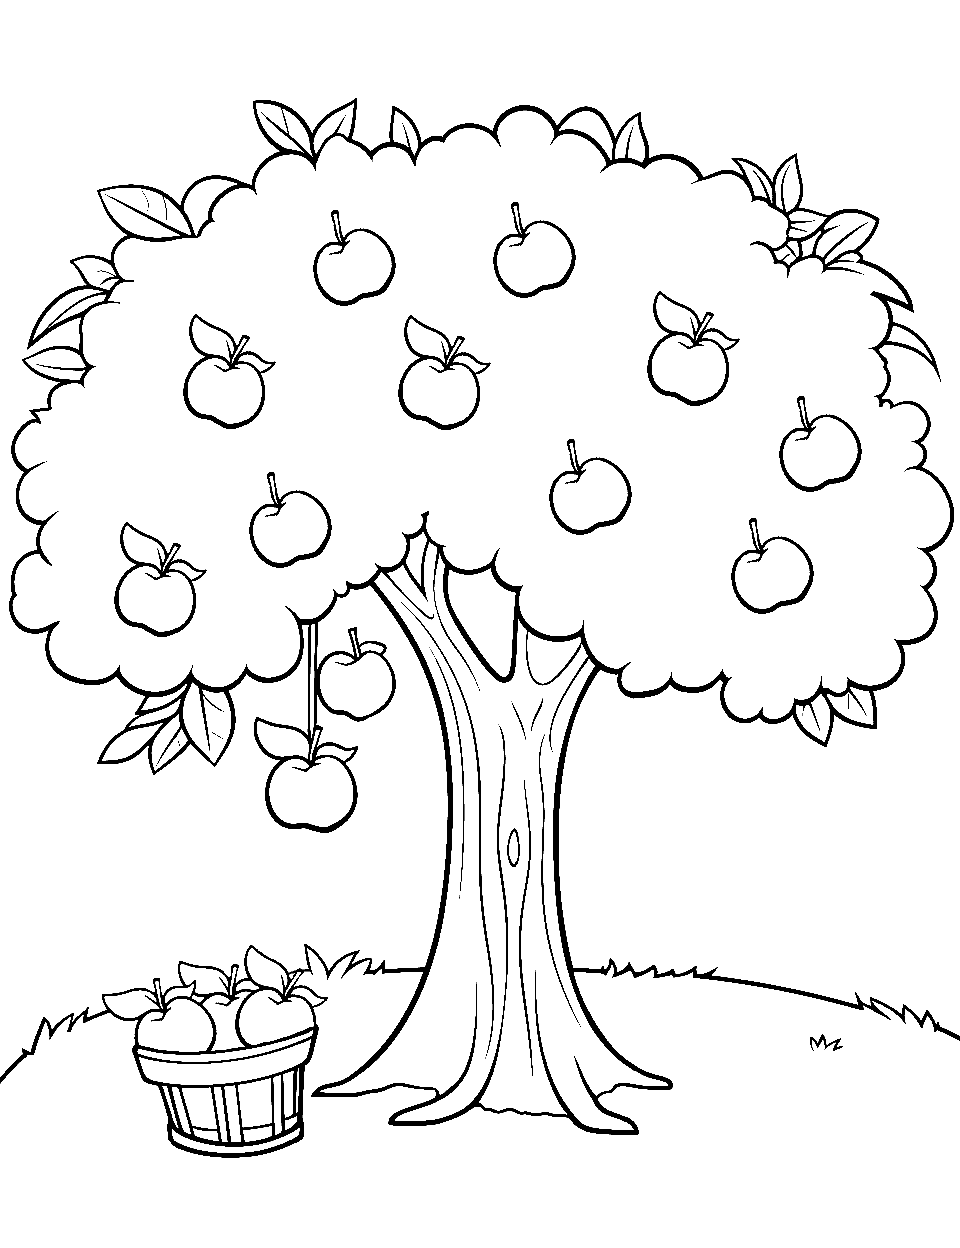 Apple Orchard Coloring Page - Trees filled with apples and a basket with some collected apples.